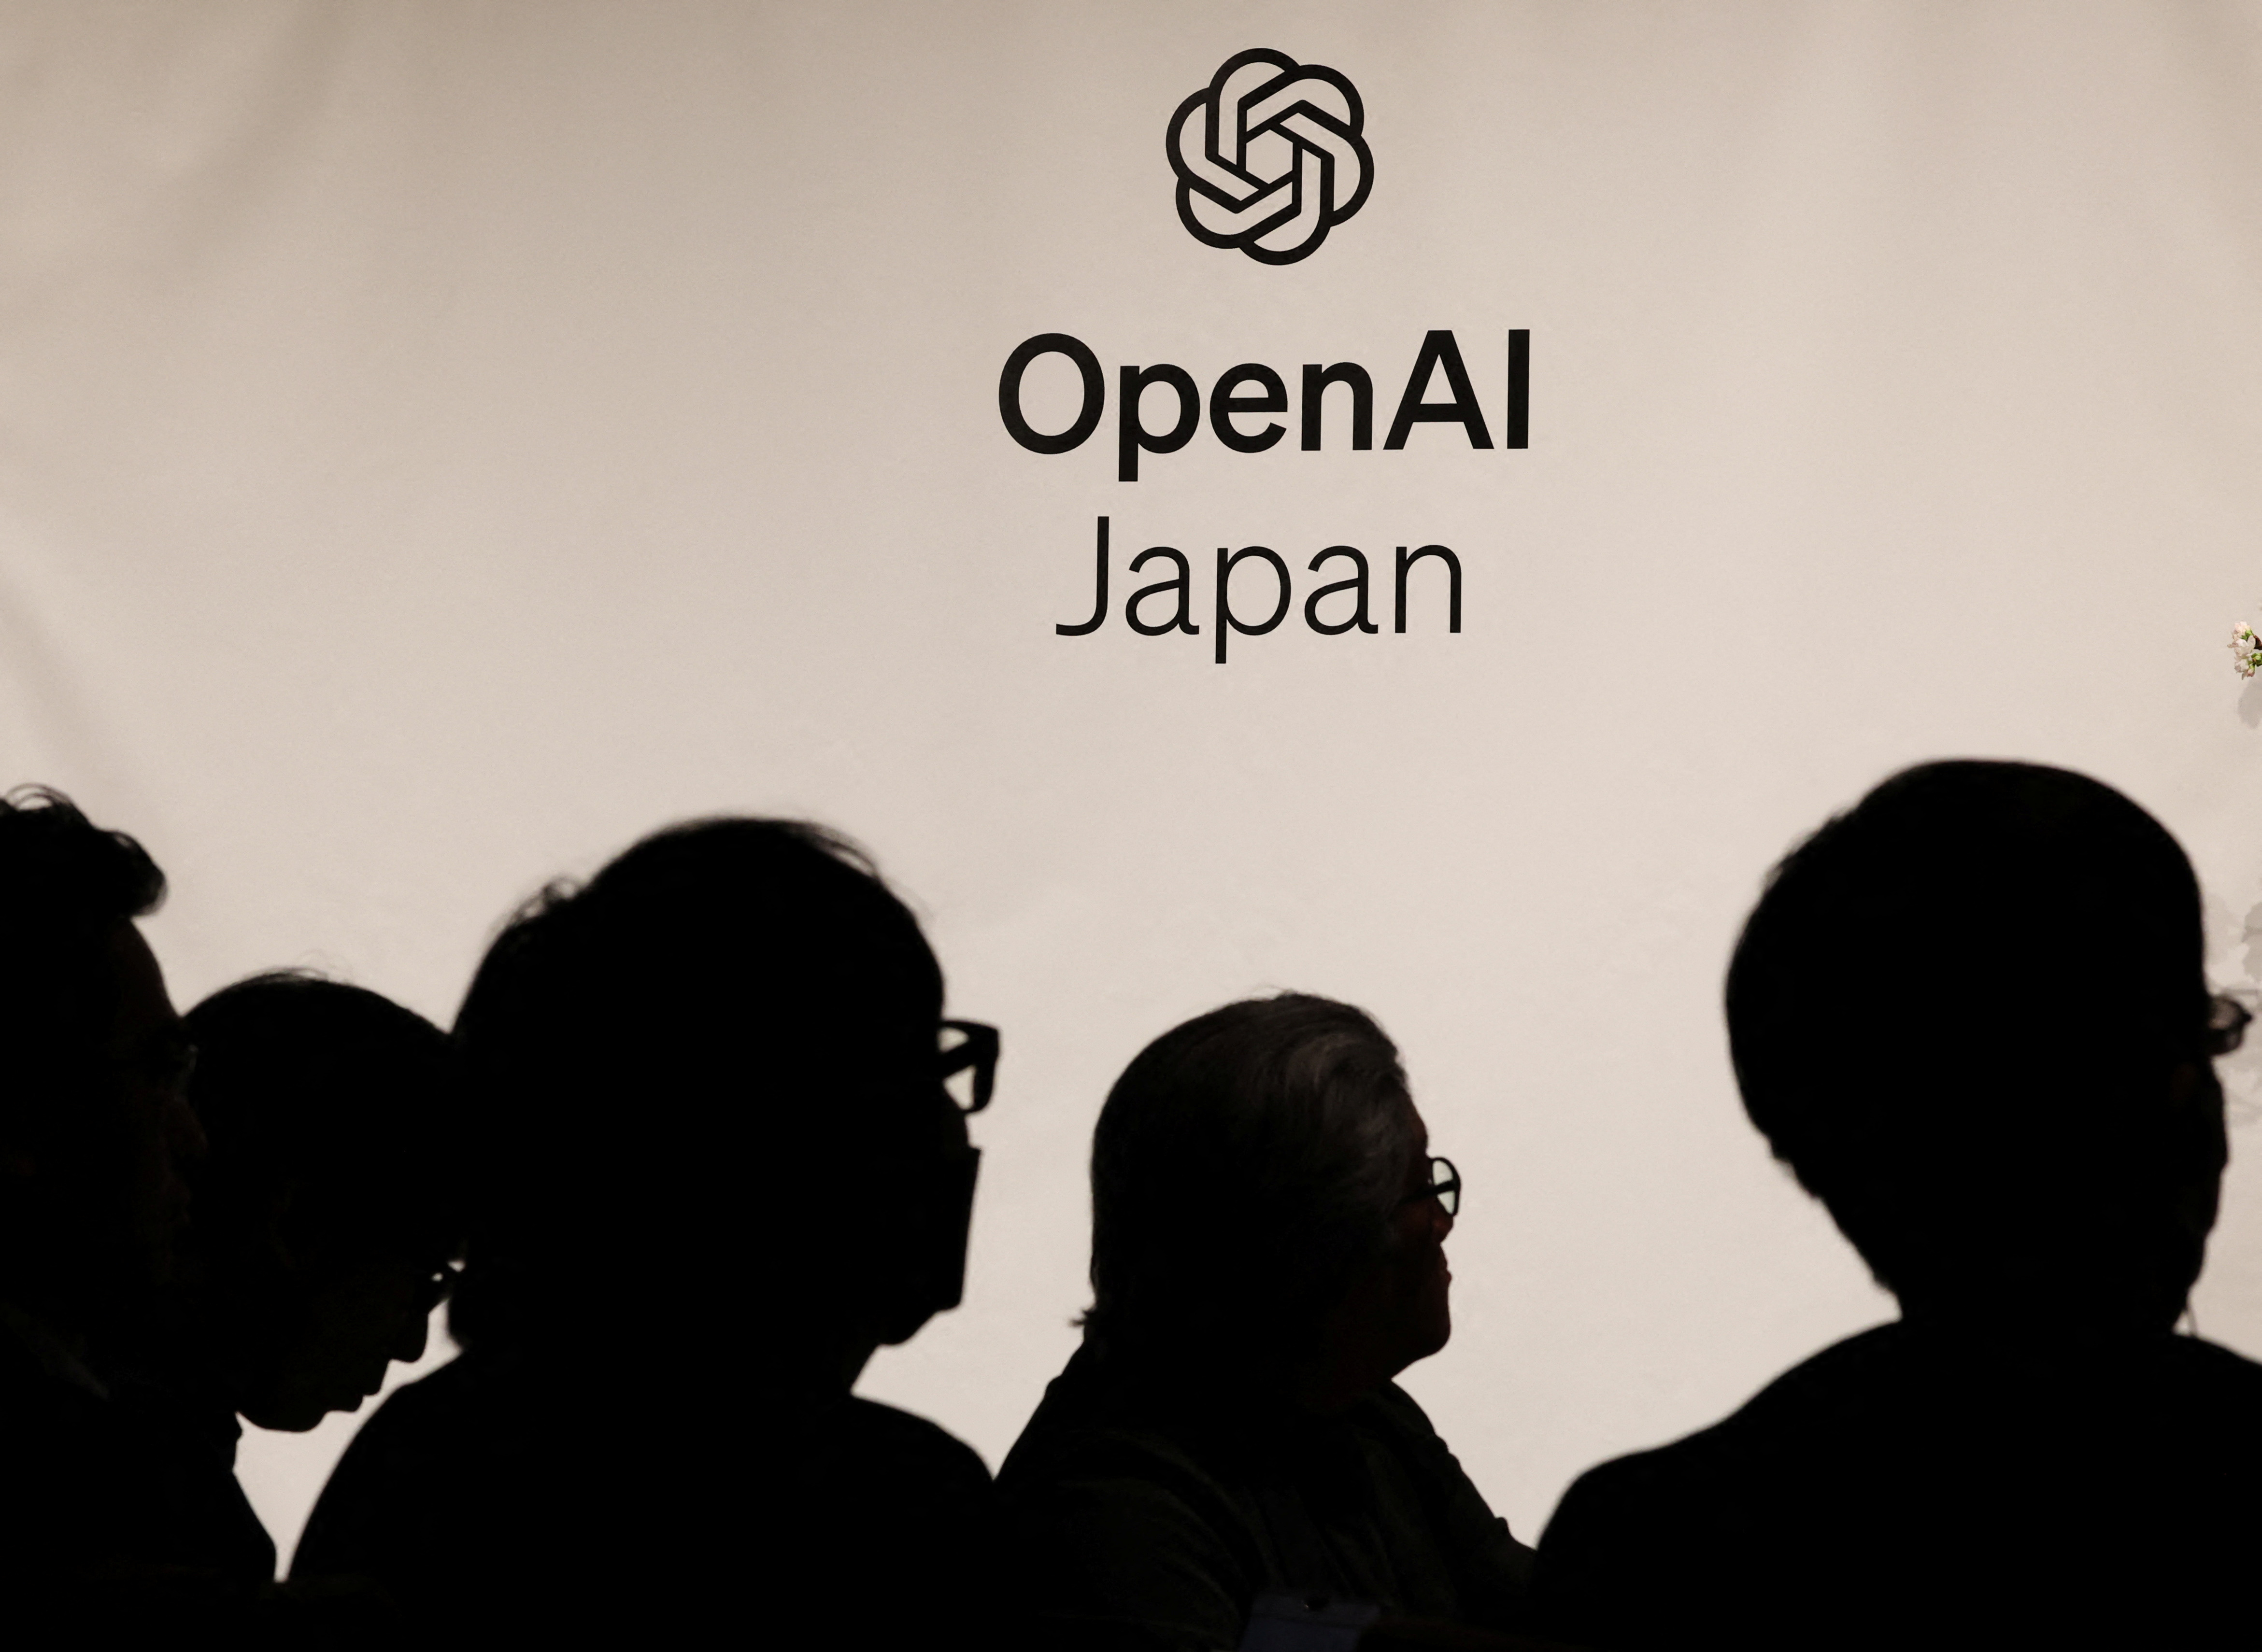 Journalists are silhouetted at OpenAI’s press conference about the opening of its first Asia office in Tokyo